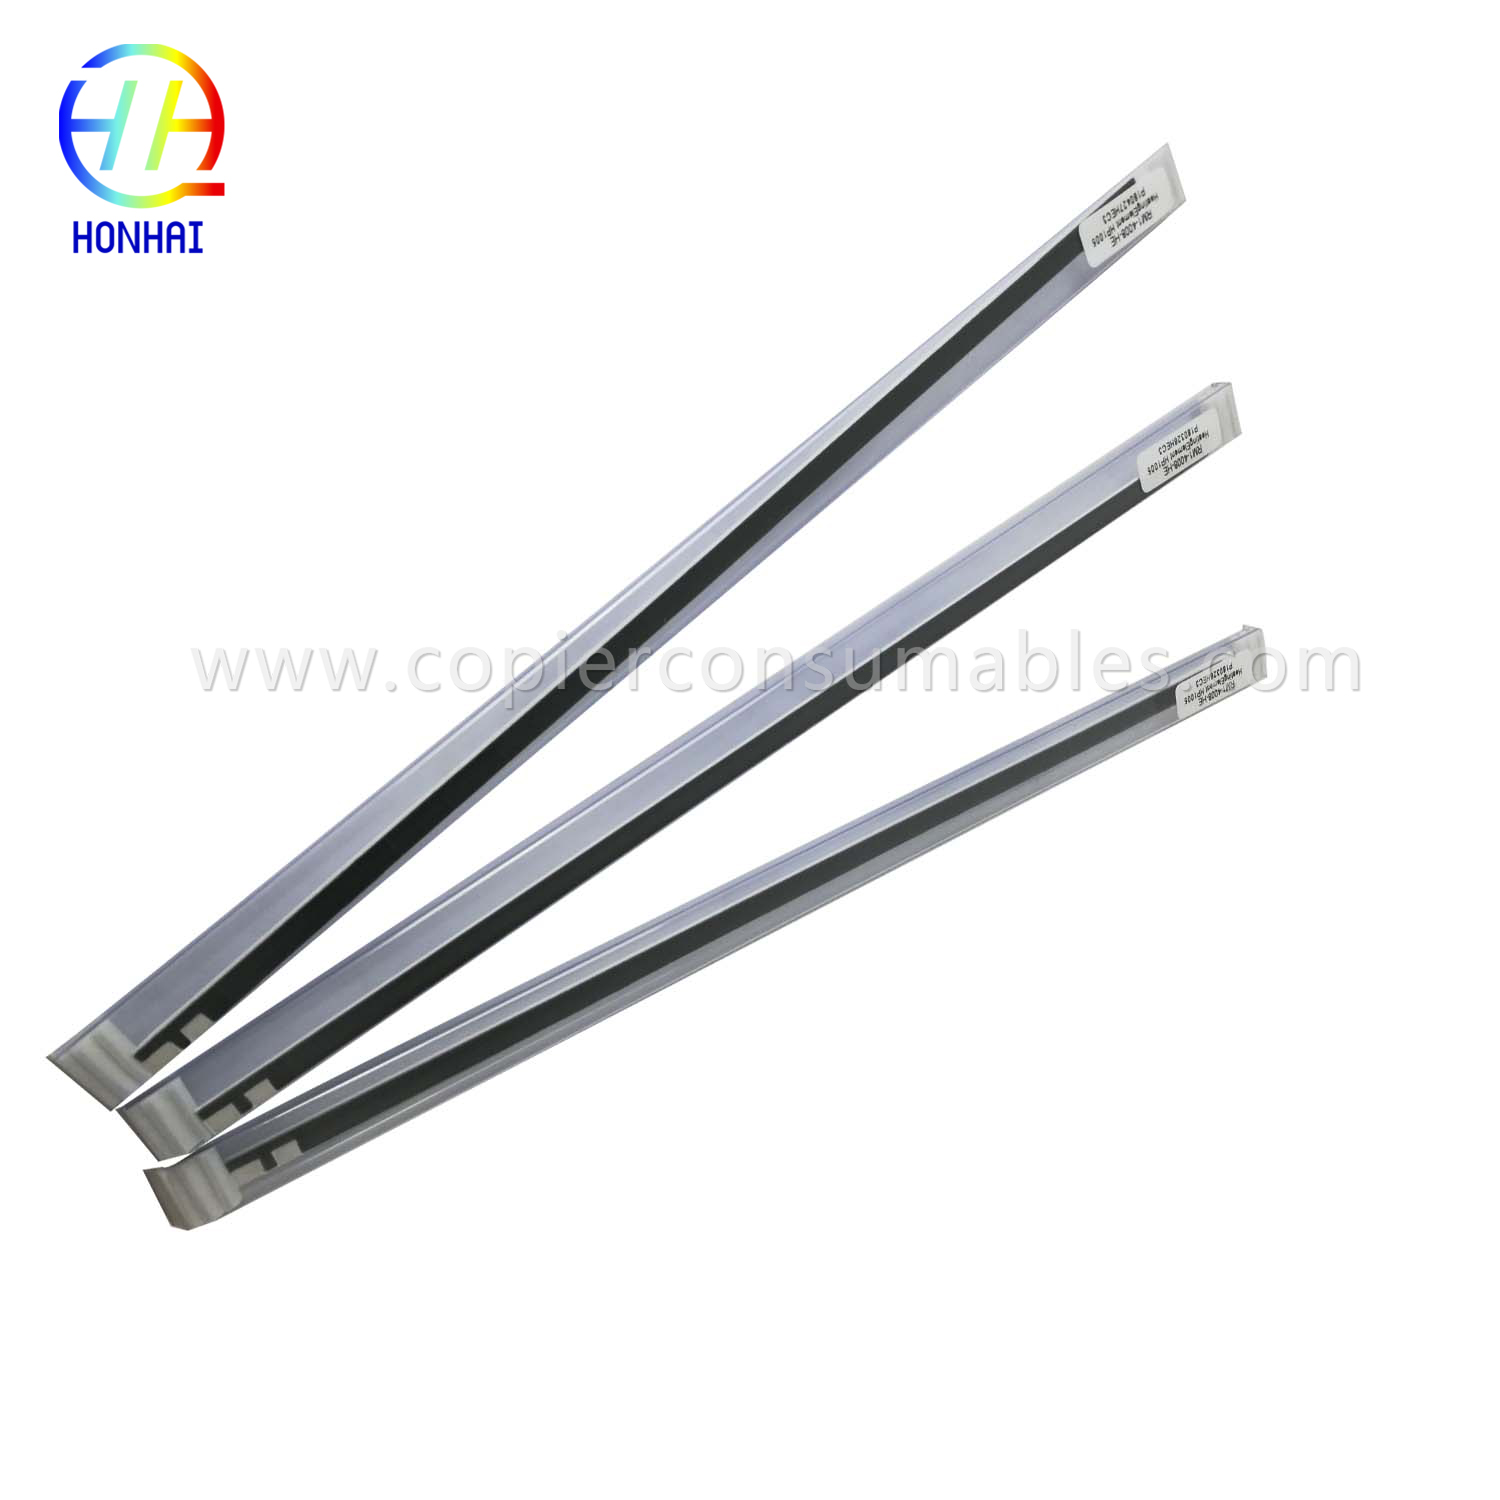 Ceramic Heating Element for HP Laserjet P1005 P1006 P1008 (RM1-4007-HE RM1-4008-HE) (2)